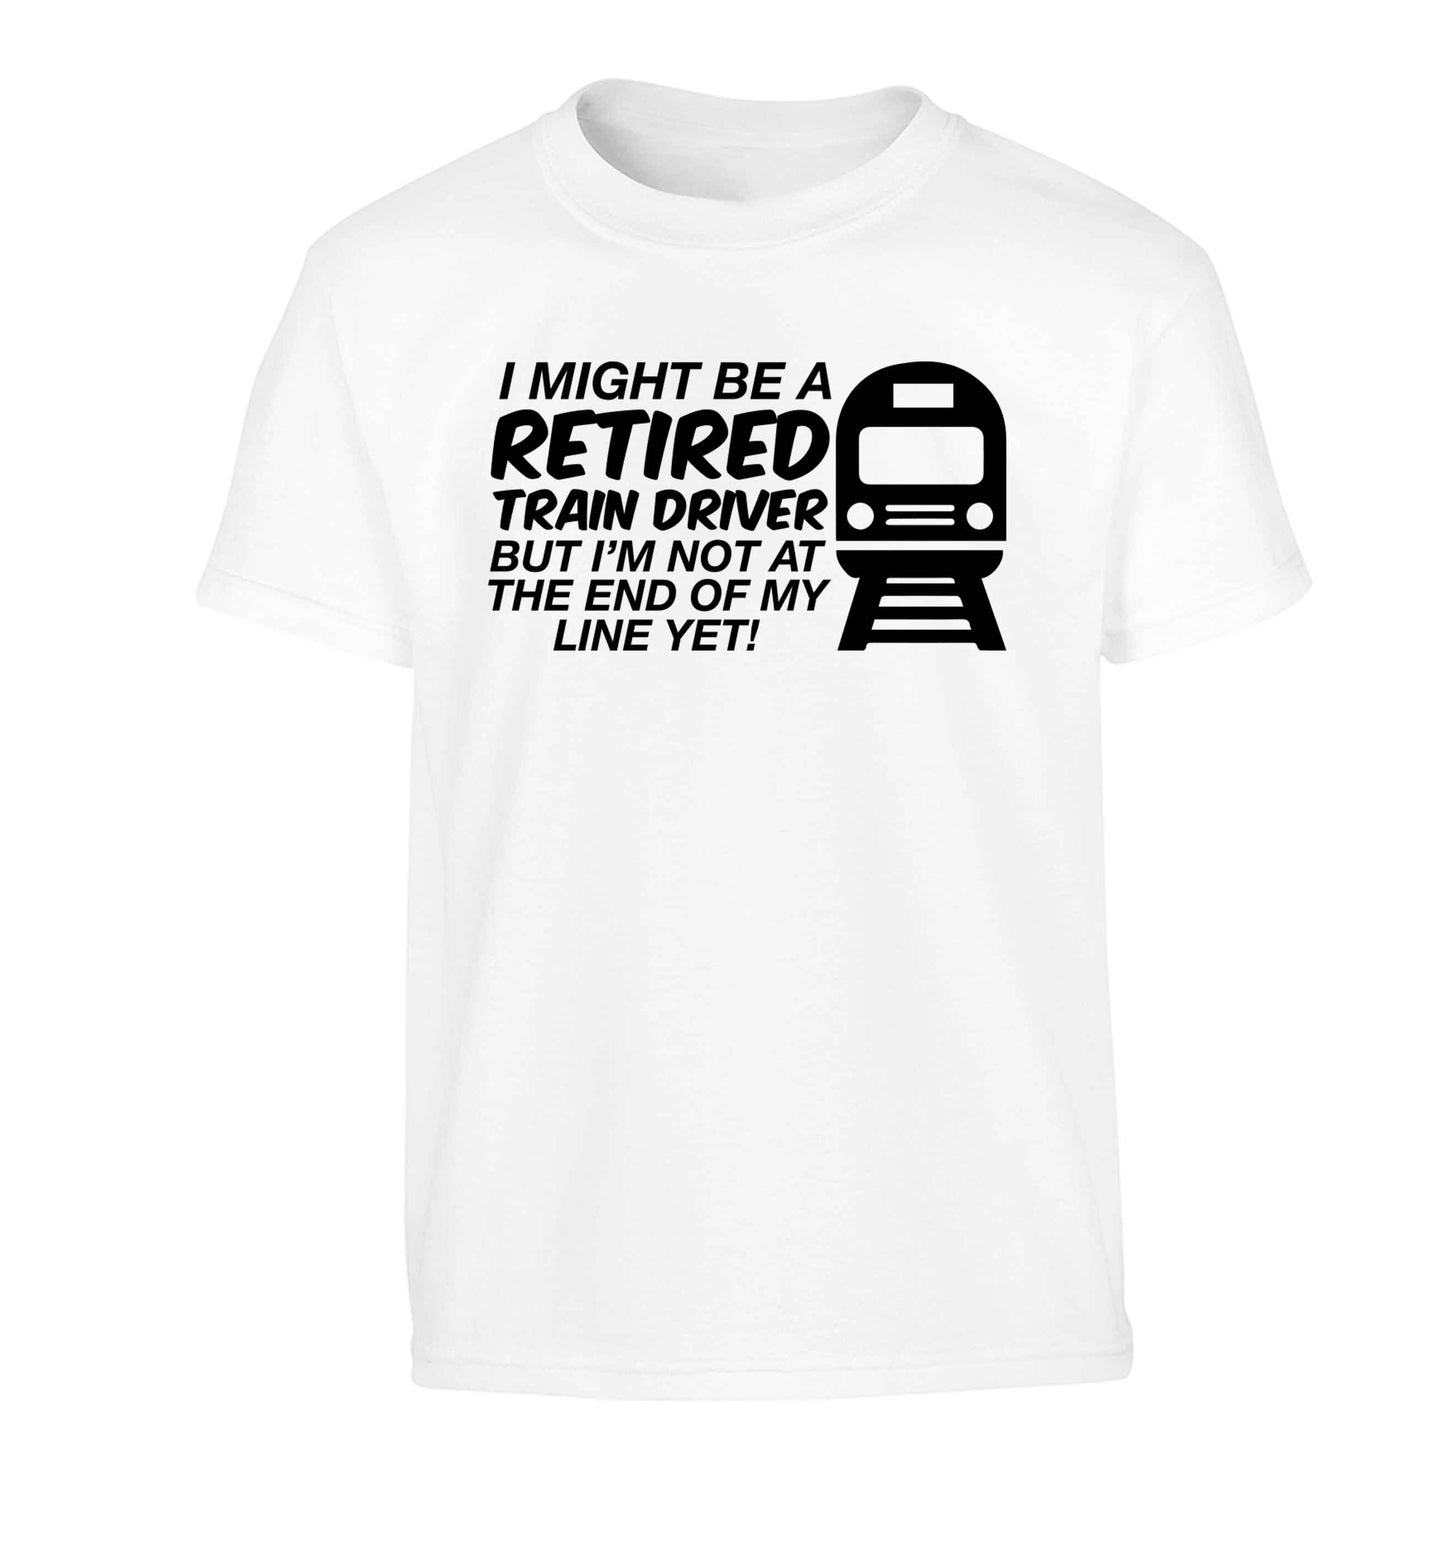 Retired train driver but I'm not at the end of my line yet Children's white Tshirt 12-13 Years